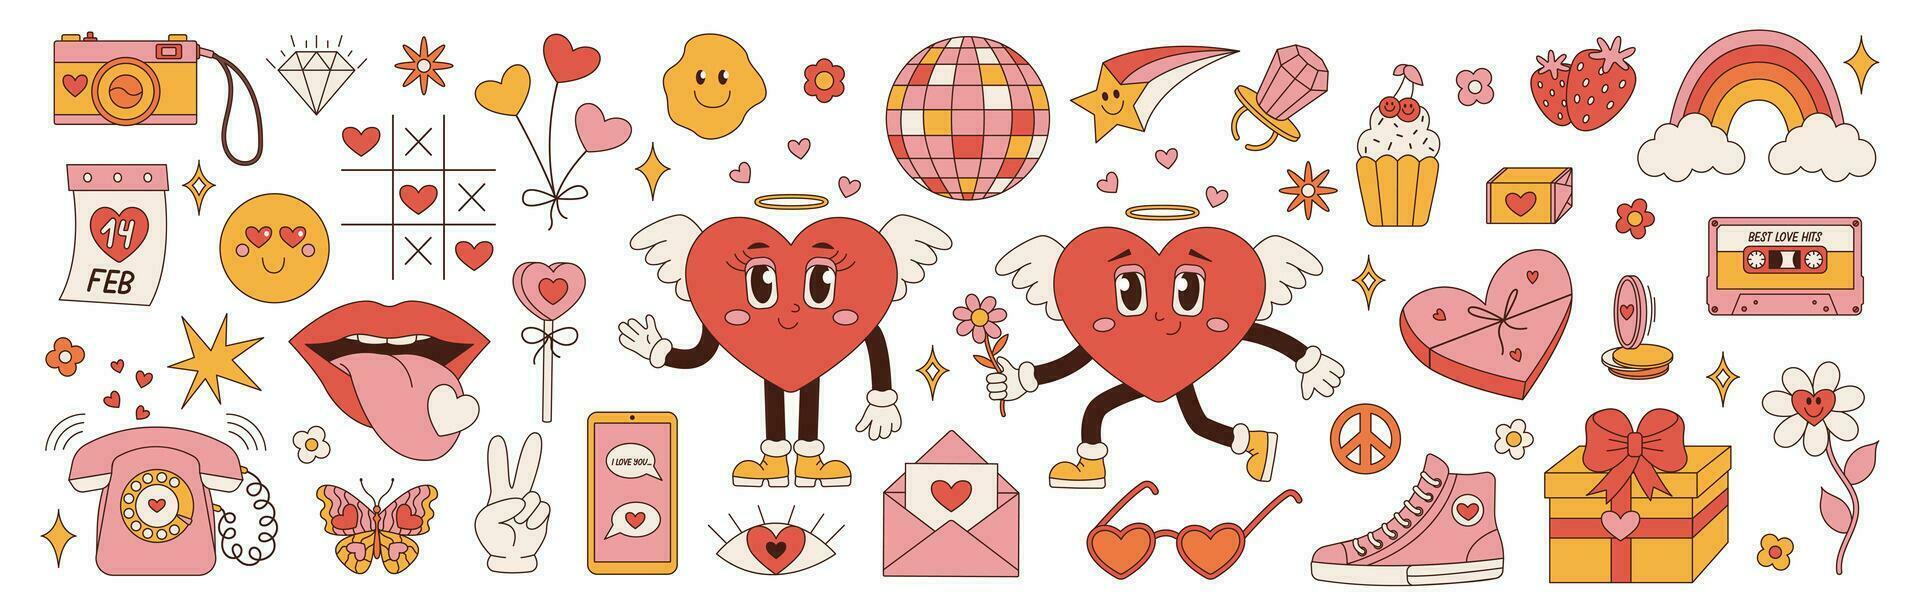 Retro groovy big set for Valentines Day. Hippie love sticker, funny characters in shape of heart, trend 60s 70s. Vector cartoon illustration